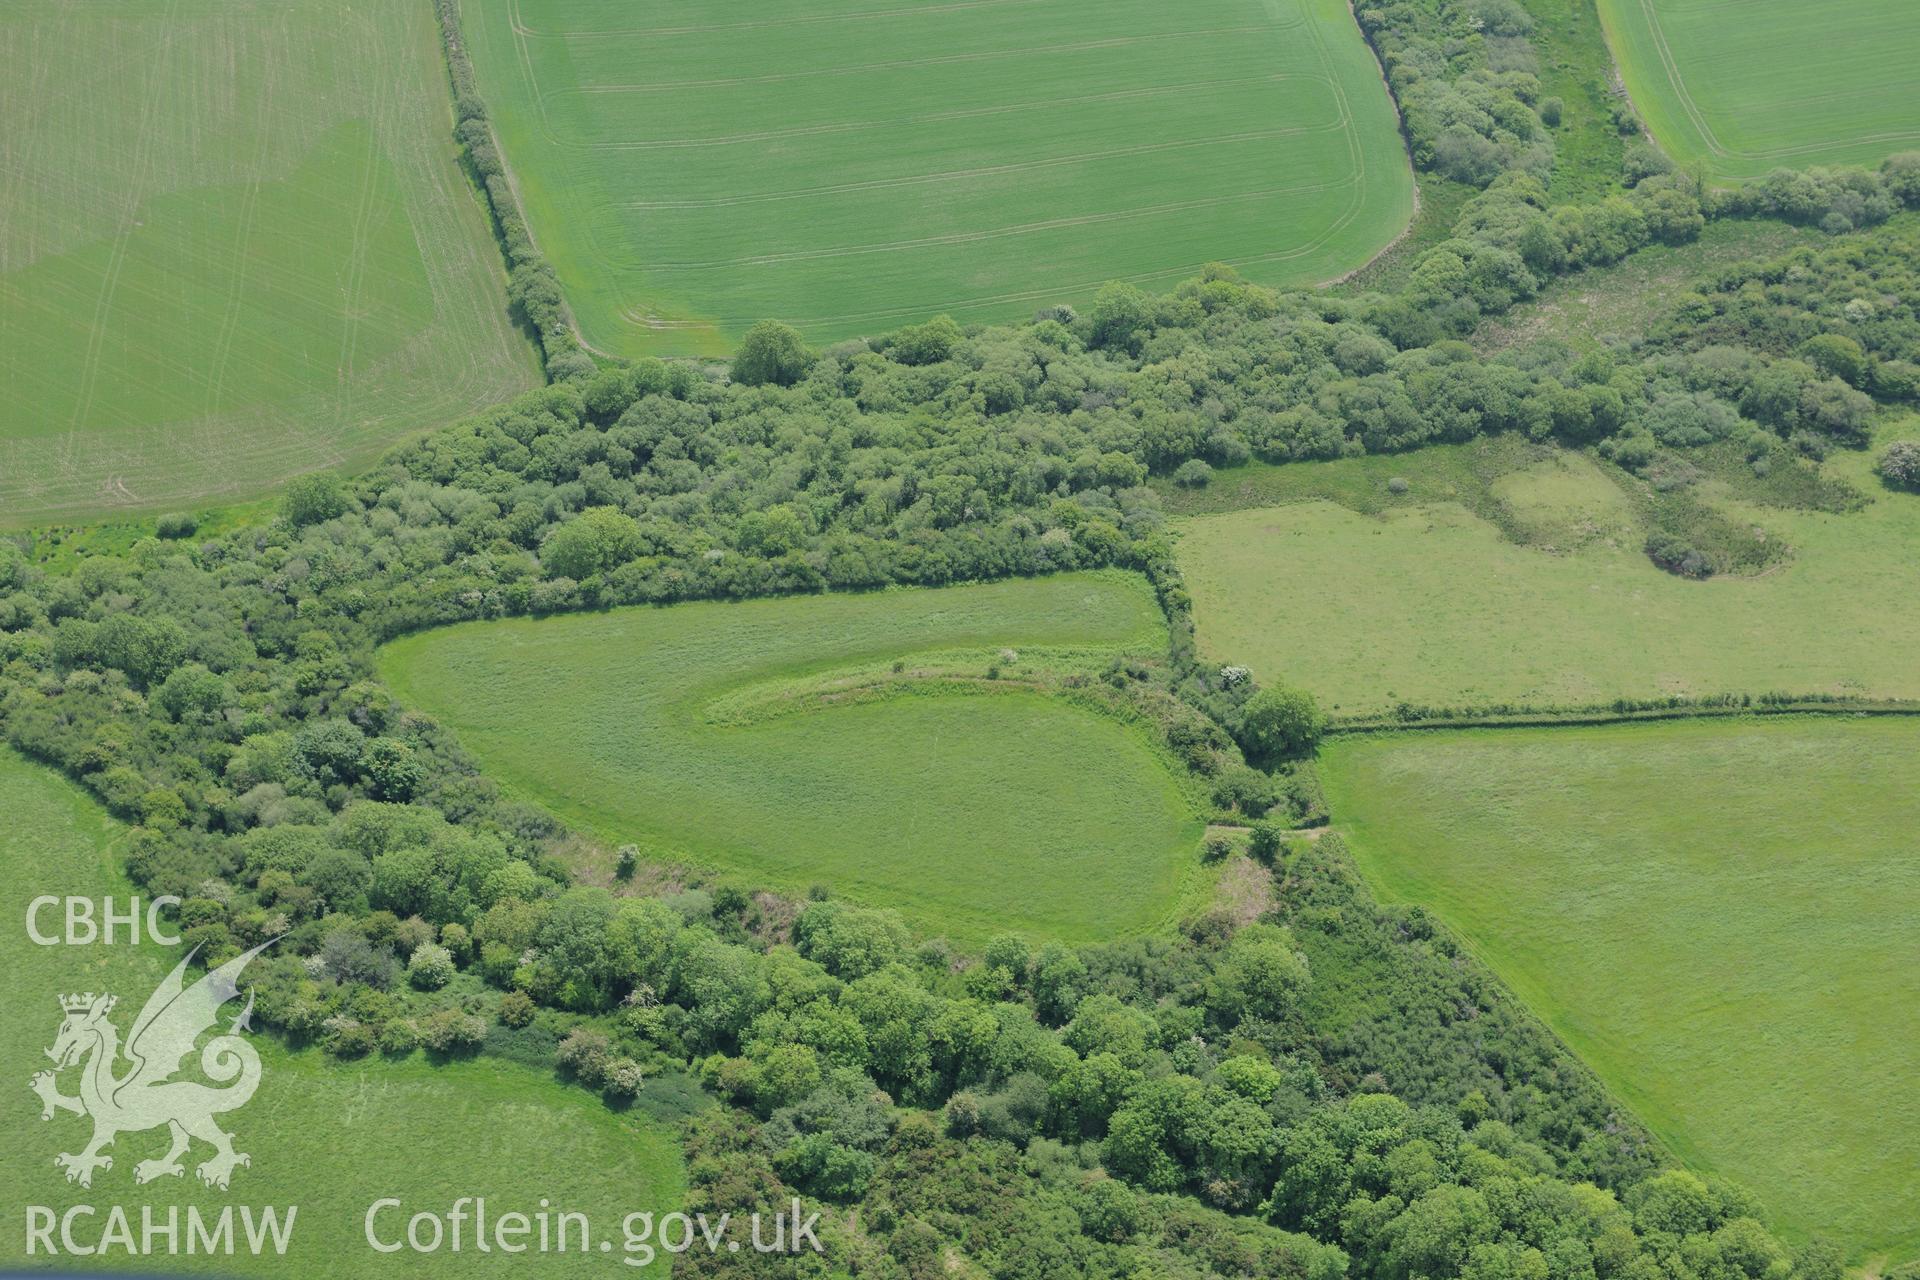 Lamborough Camp near Haverford West. Oblique aerial photograph taken during the Royal Commission's programme of archaeological aerial reconnaissance by Toby Driver on 11th June 2015.